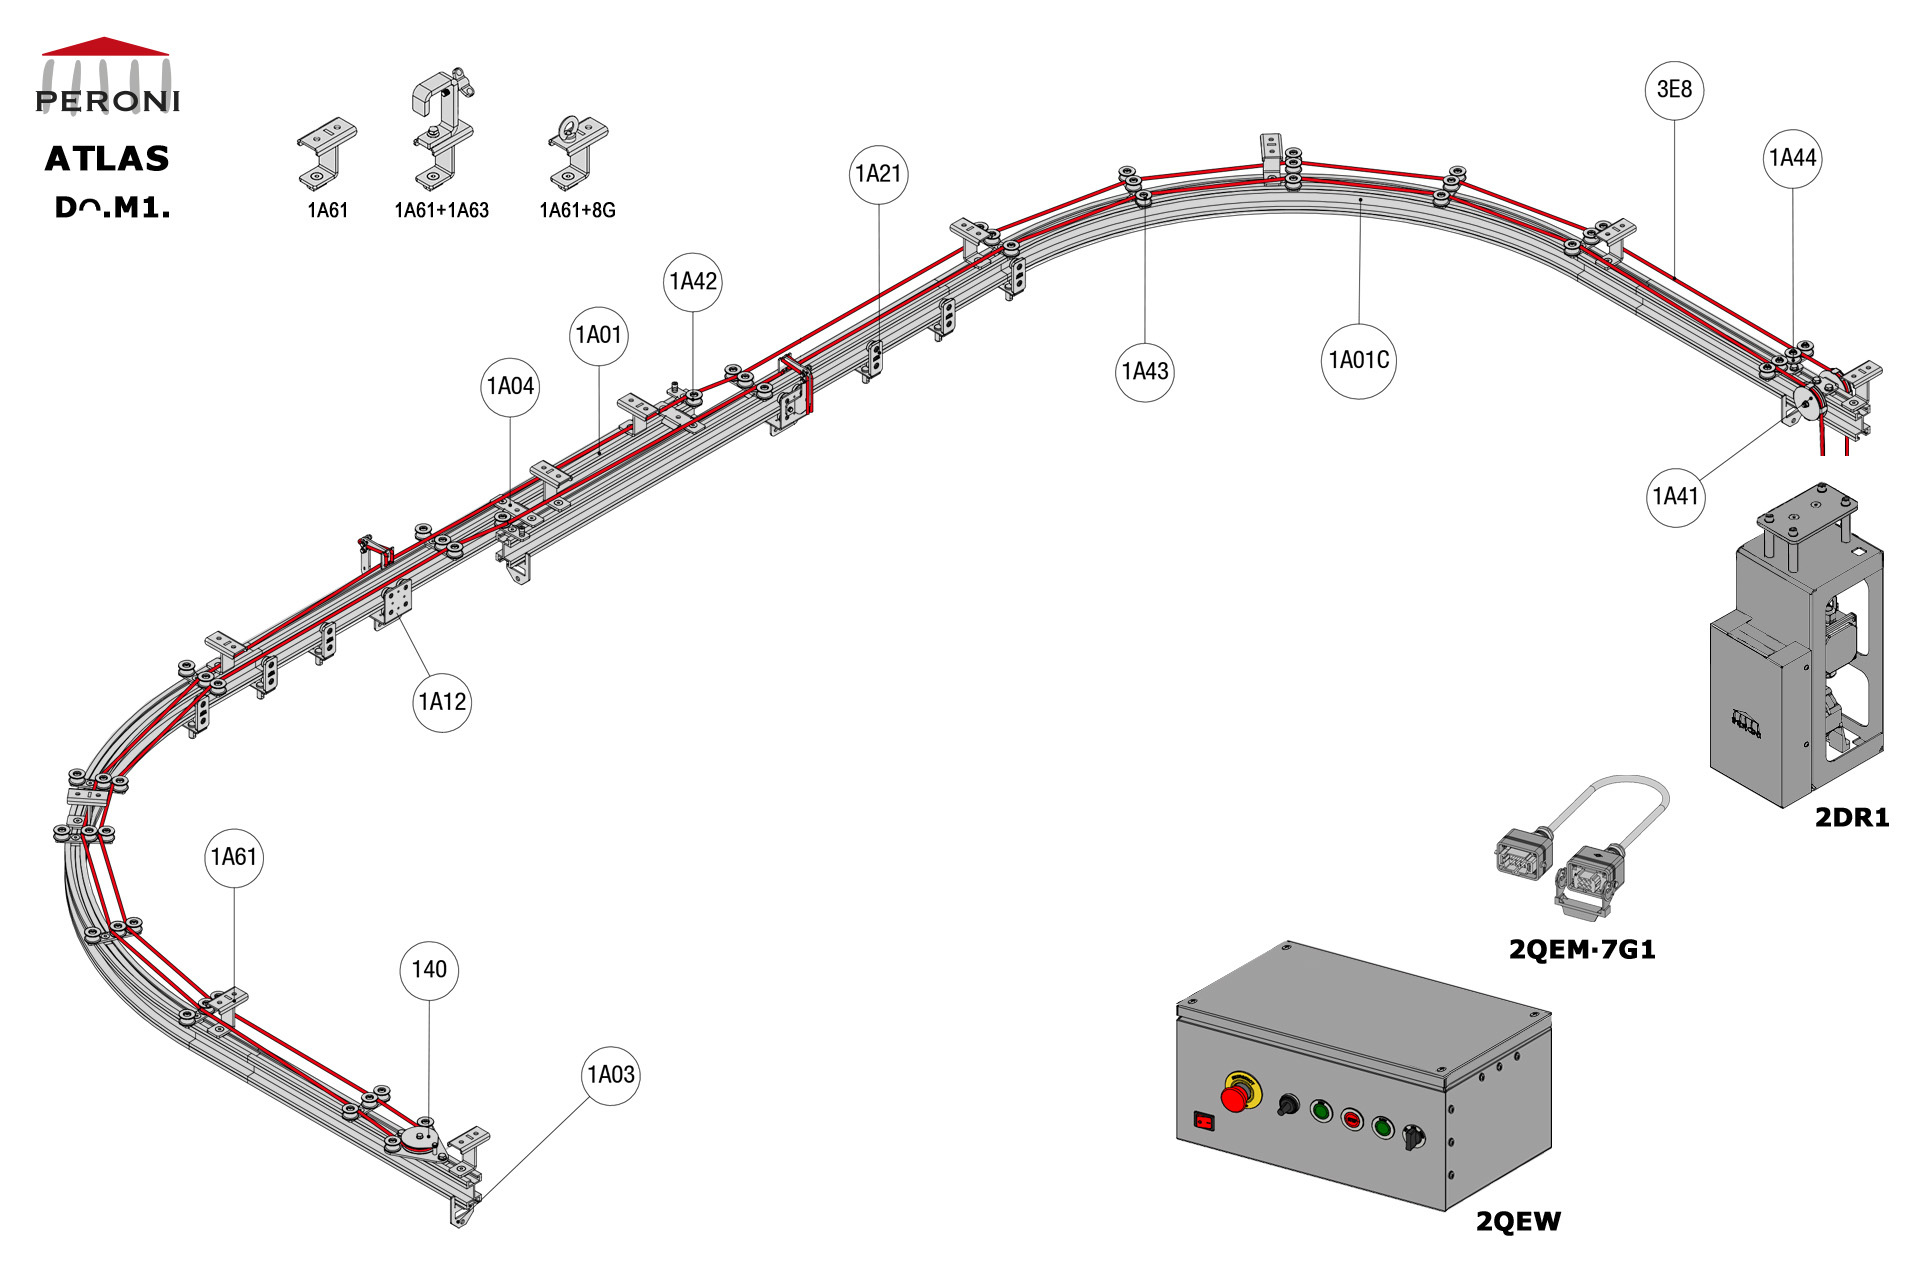 Dᴖ.M1. configuration track Dᴖ. Straight double rail central openingM1. Motorizedcentral overlap exceeding 50 cmComponents1A01 - Straight rail1A01C - Curved rail1A02 - Connection set1A03 - End stop1A04 - Overlap bridge1A12 - Top cord master carrier1A20 - 2 Wheel runnerMotion control1A40 - Return pulley1A41 - Head double pulley1A42 - Top cord guide for overlap1A43 - Top cord guide1A44 - Top cord aligner1A70 - Top cord limit switch with pulley1A71 - Top cord limit switch arm1A72 - Cord guide for limit switch2DR1-RDS2QEM-7G1-152QEW - Panou de comanda W 3E - Franghie Poly Ø 8 mm